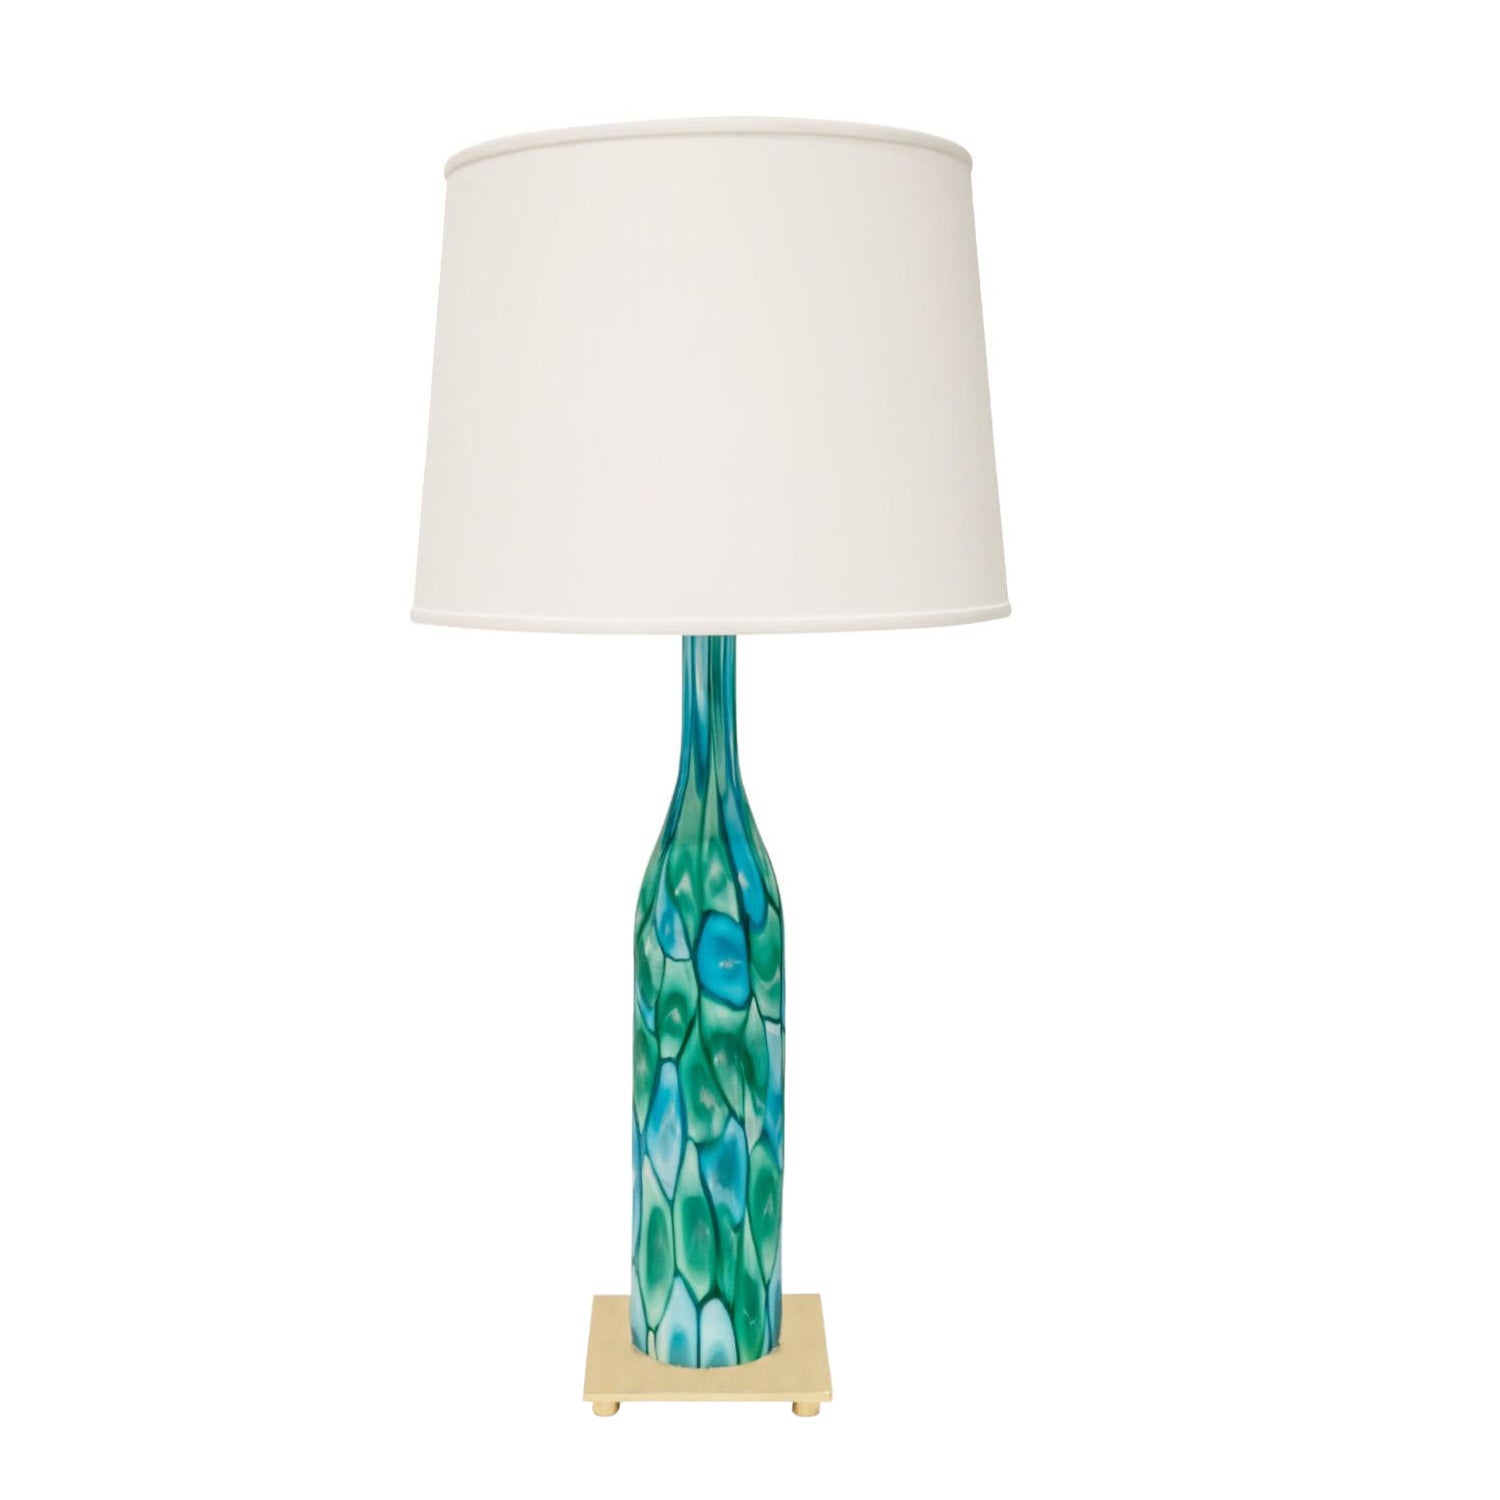 Fratelli Toso Art Glass Table Lamp with Green and Blue Murrhines, 1959 For Sale